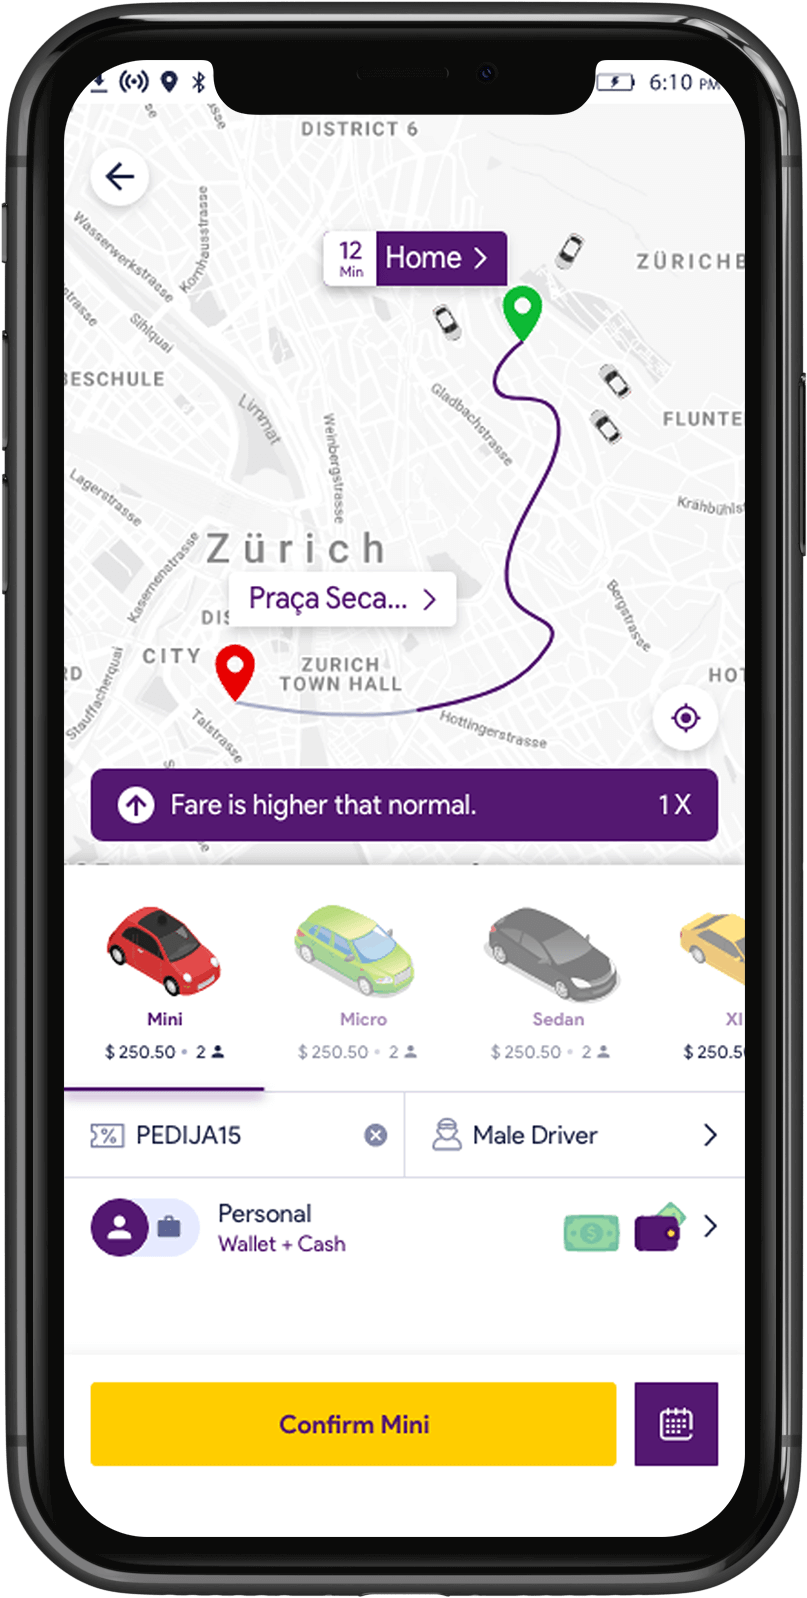 Home screen of Transport Booking Software